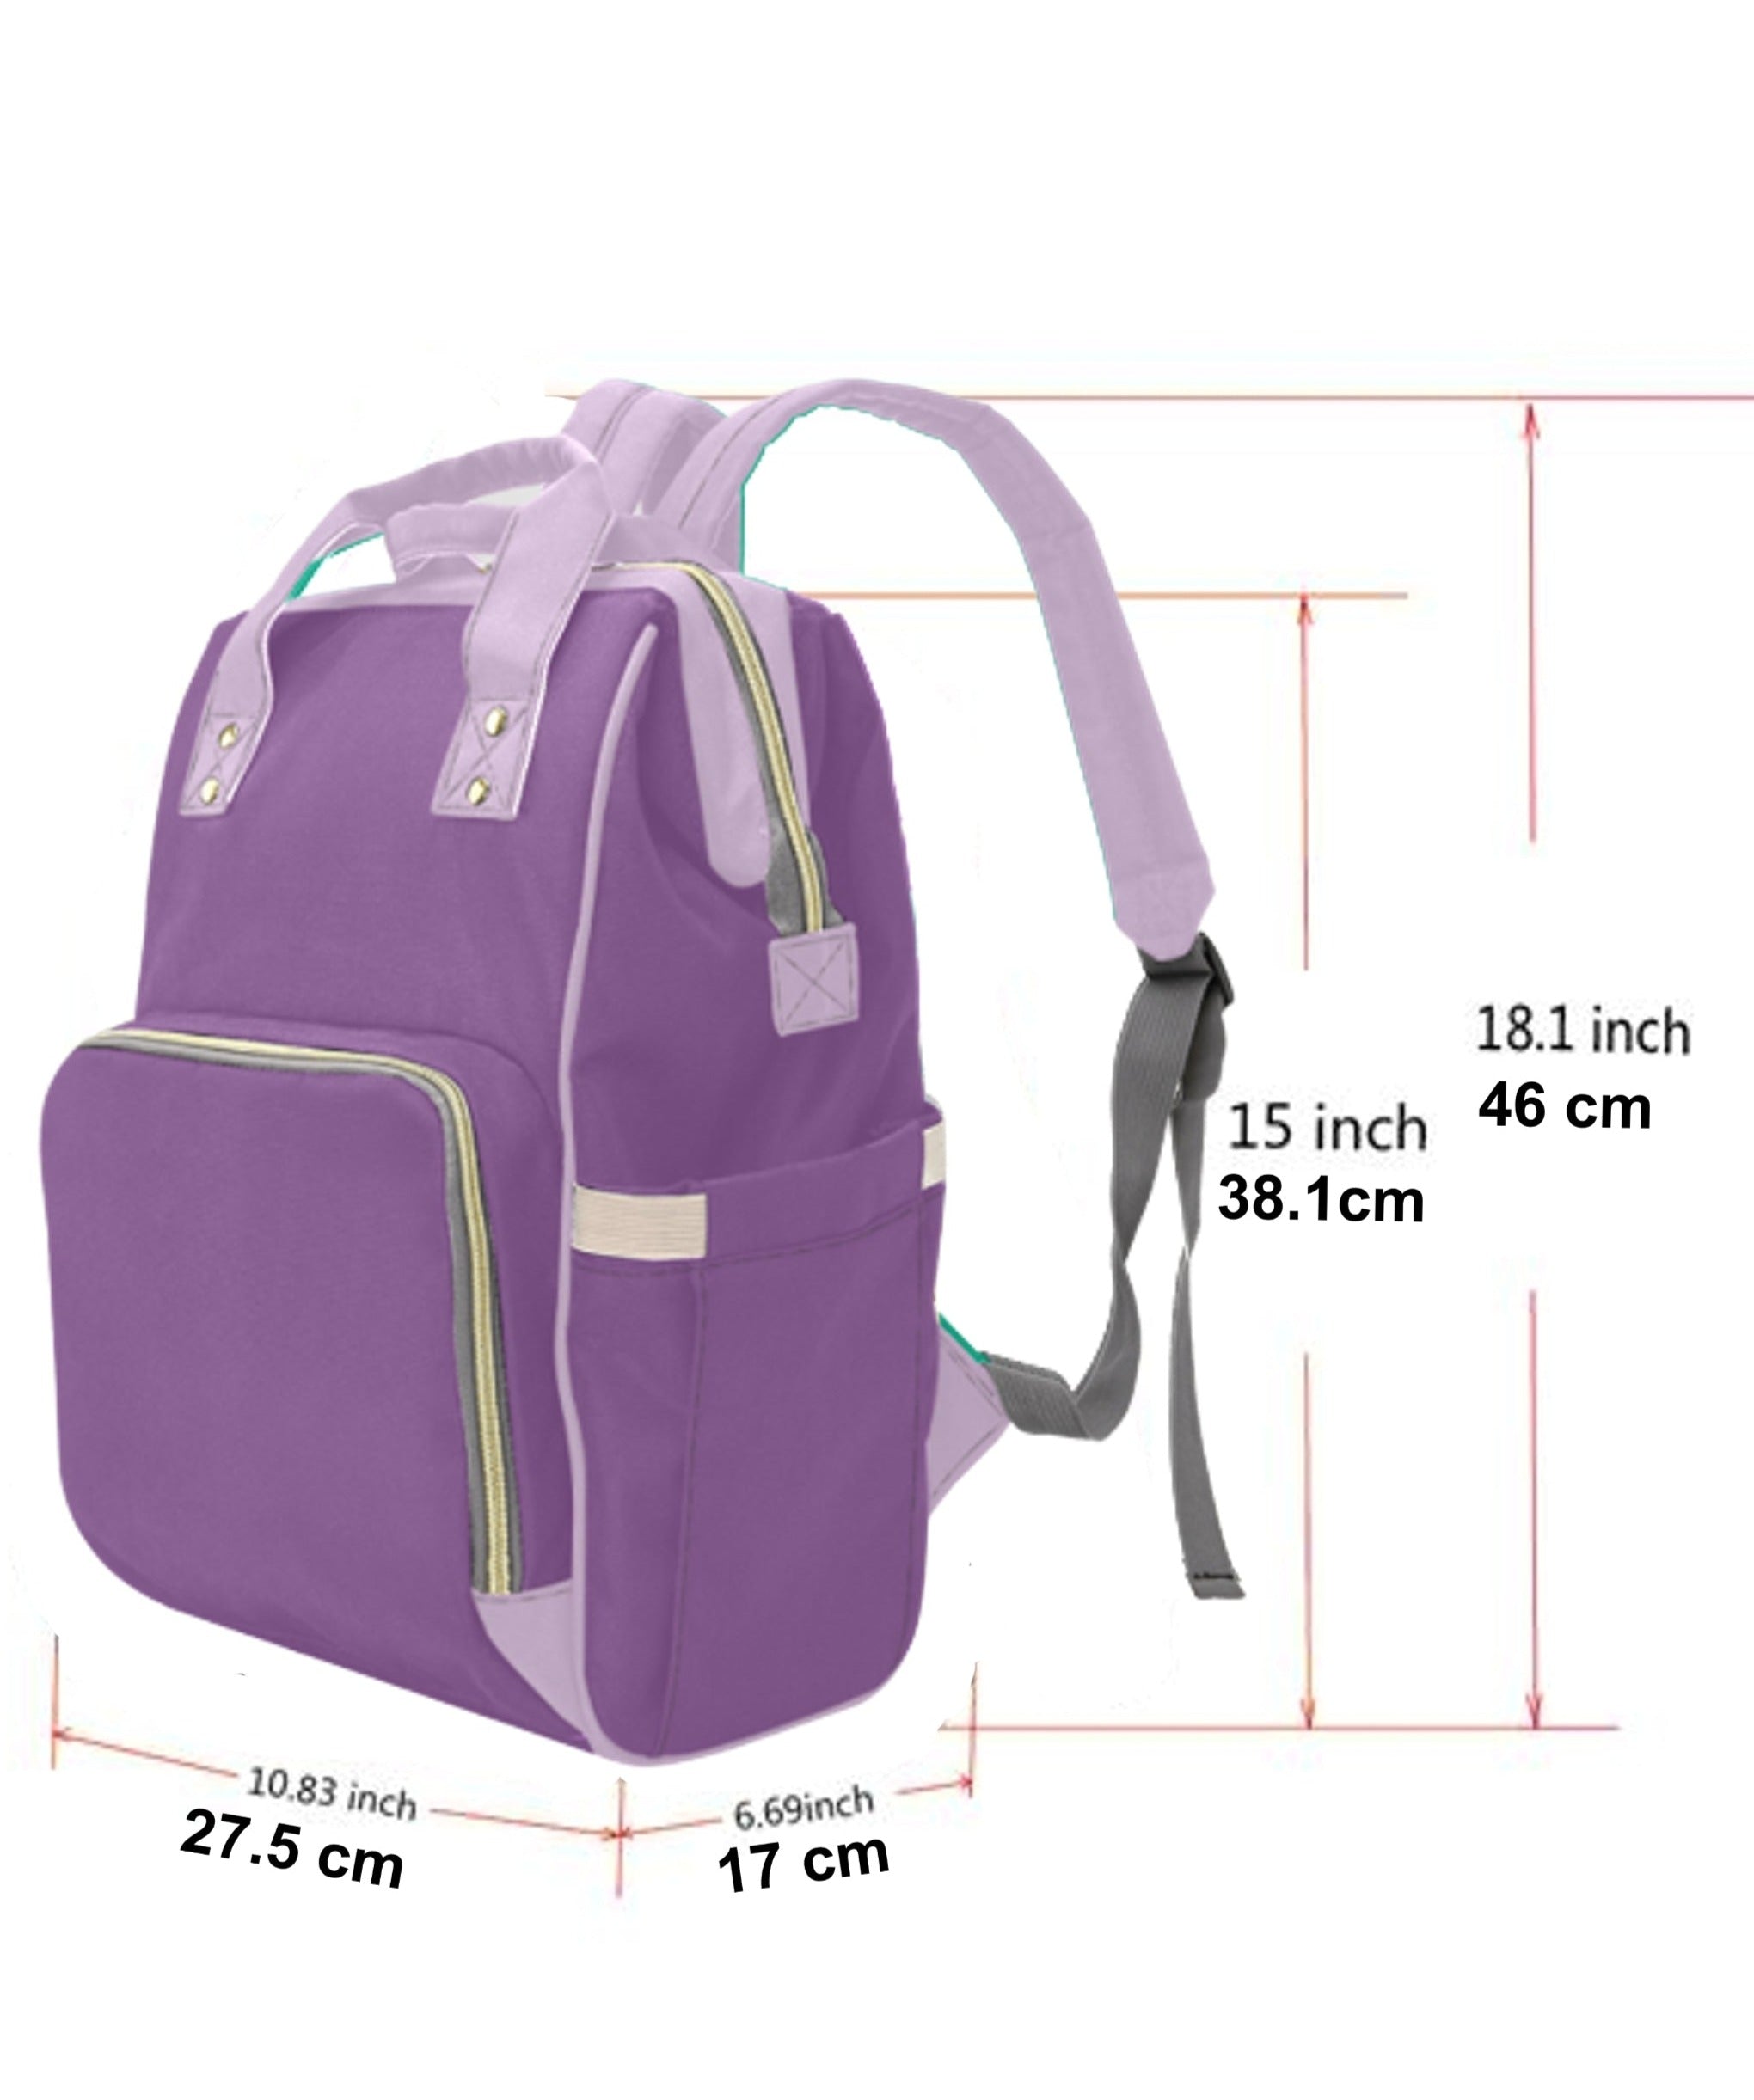 Motorcycles - Multi-Function Backpack Nappy Bag